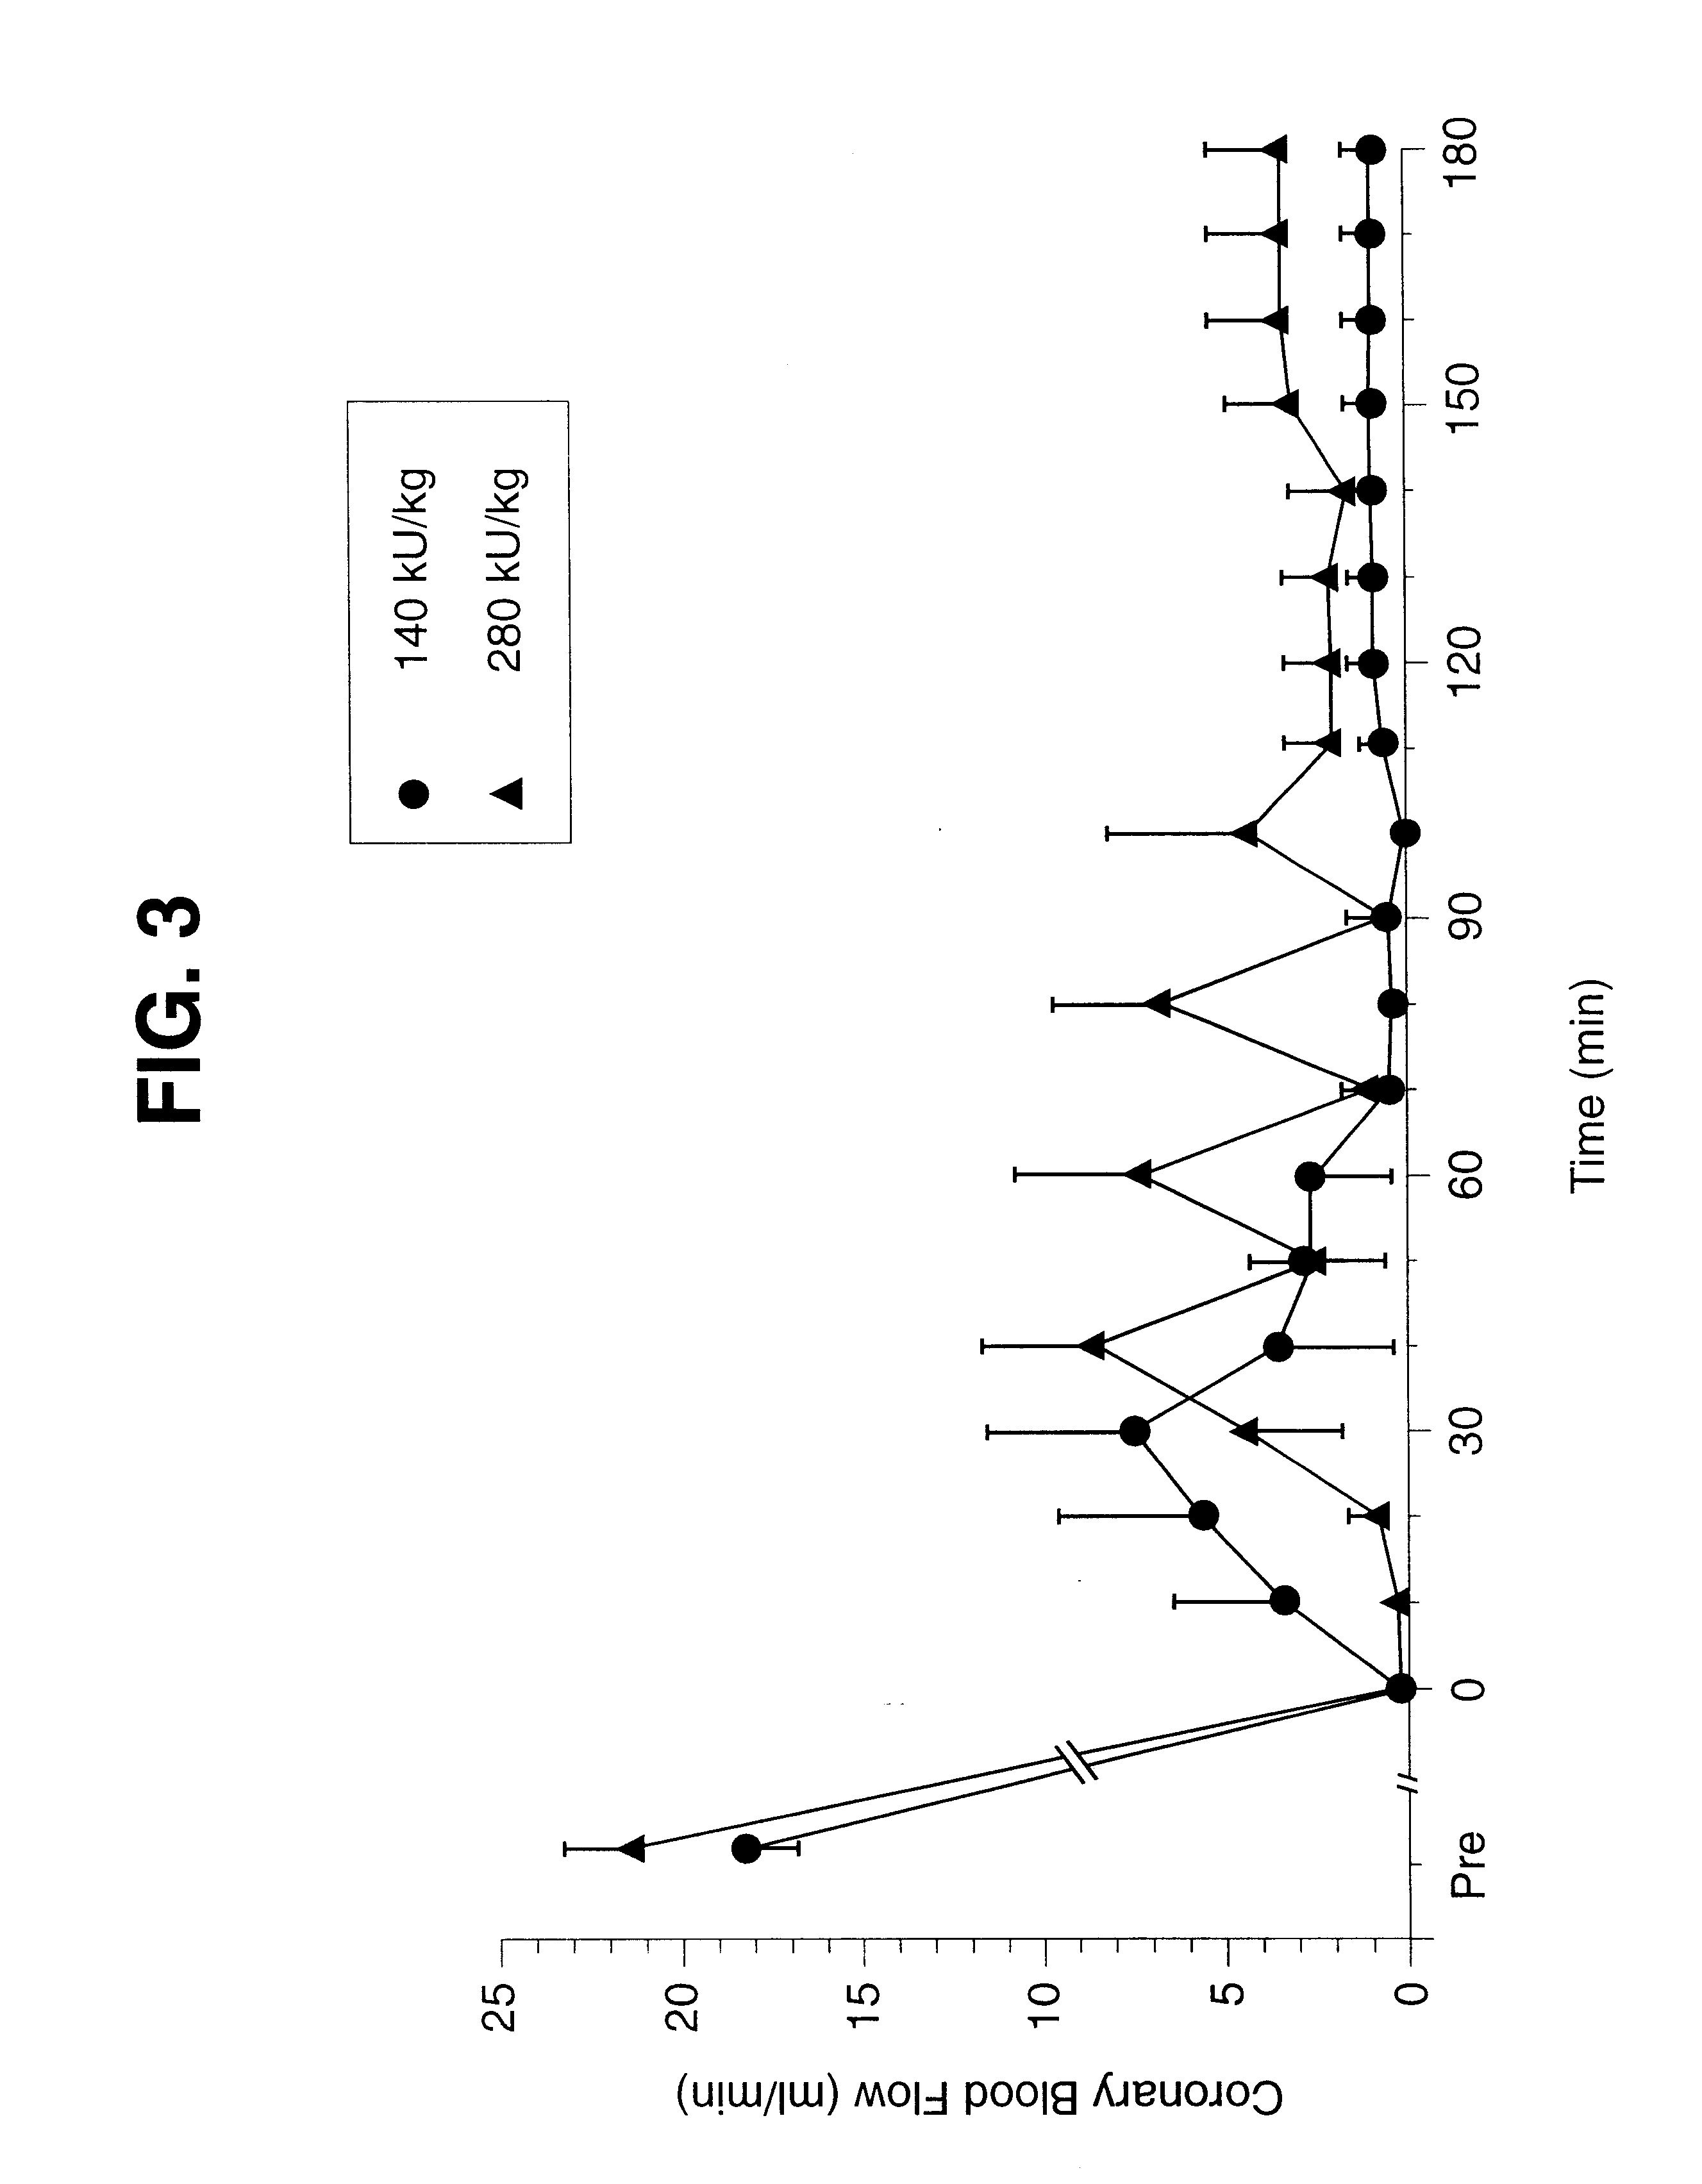 Method for treating thromboembolic conditions by inhibiting reocclusion via the use of multiple bolus administration of thrombolytically active proteins